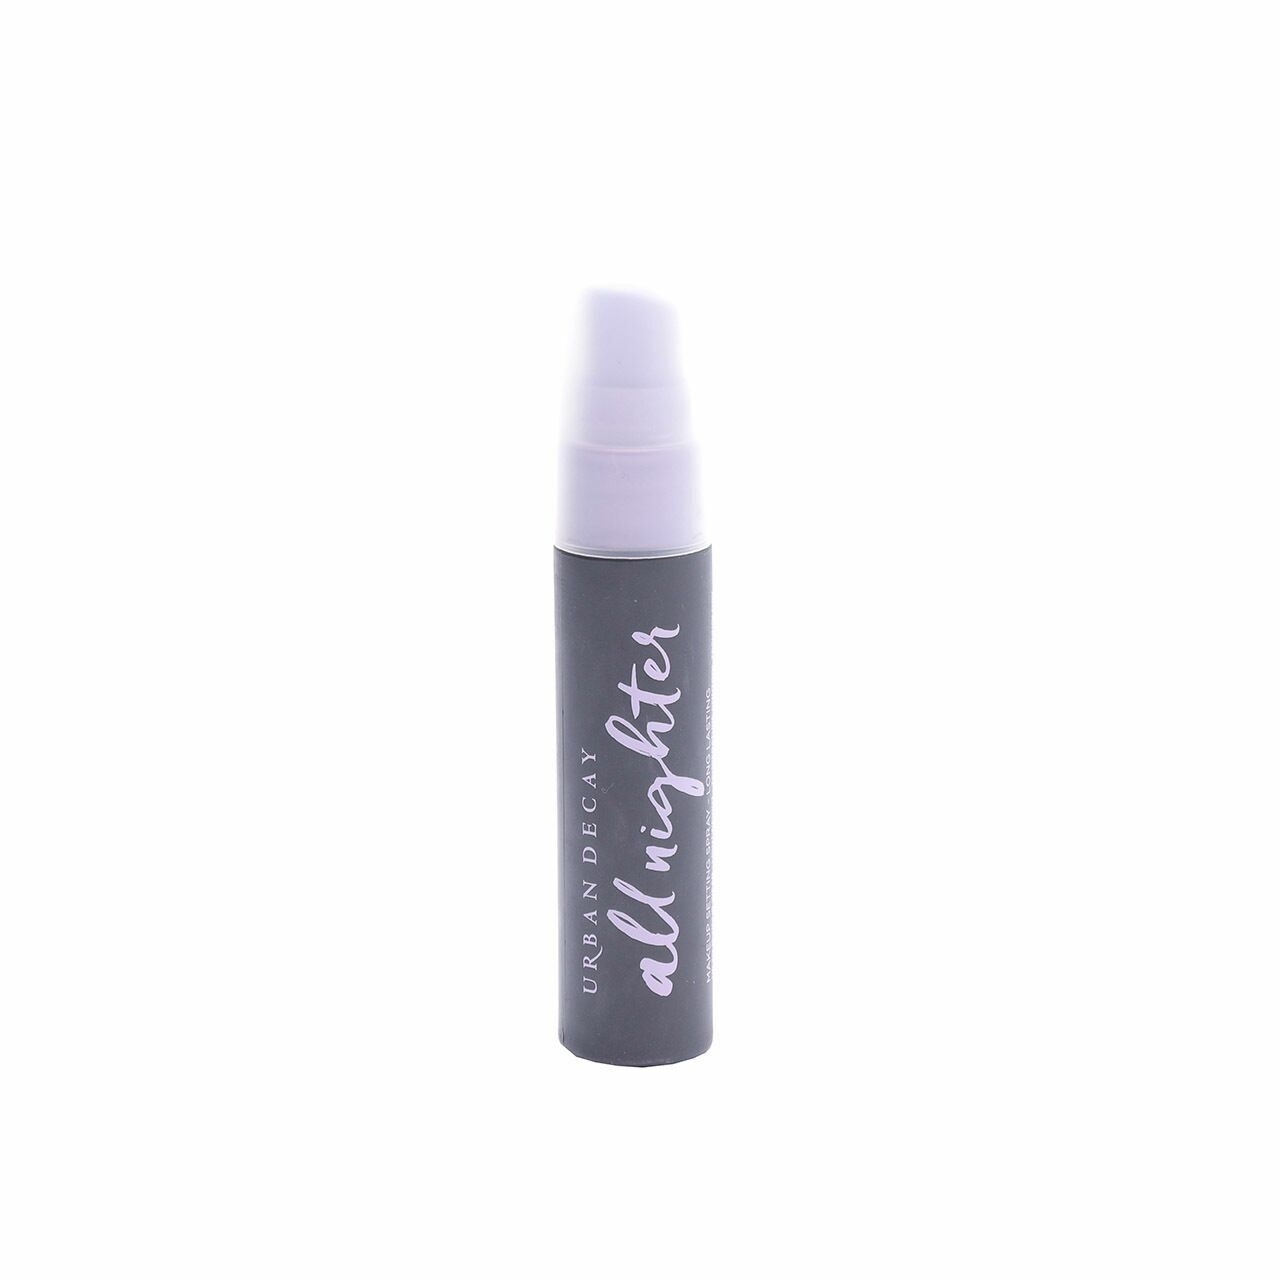 Urban Decay All Nighter Long-Lasting Makeup Setting Spray Faces